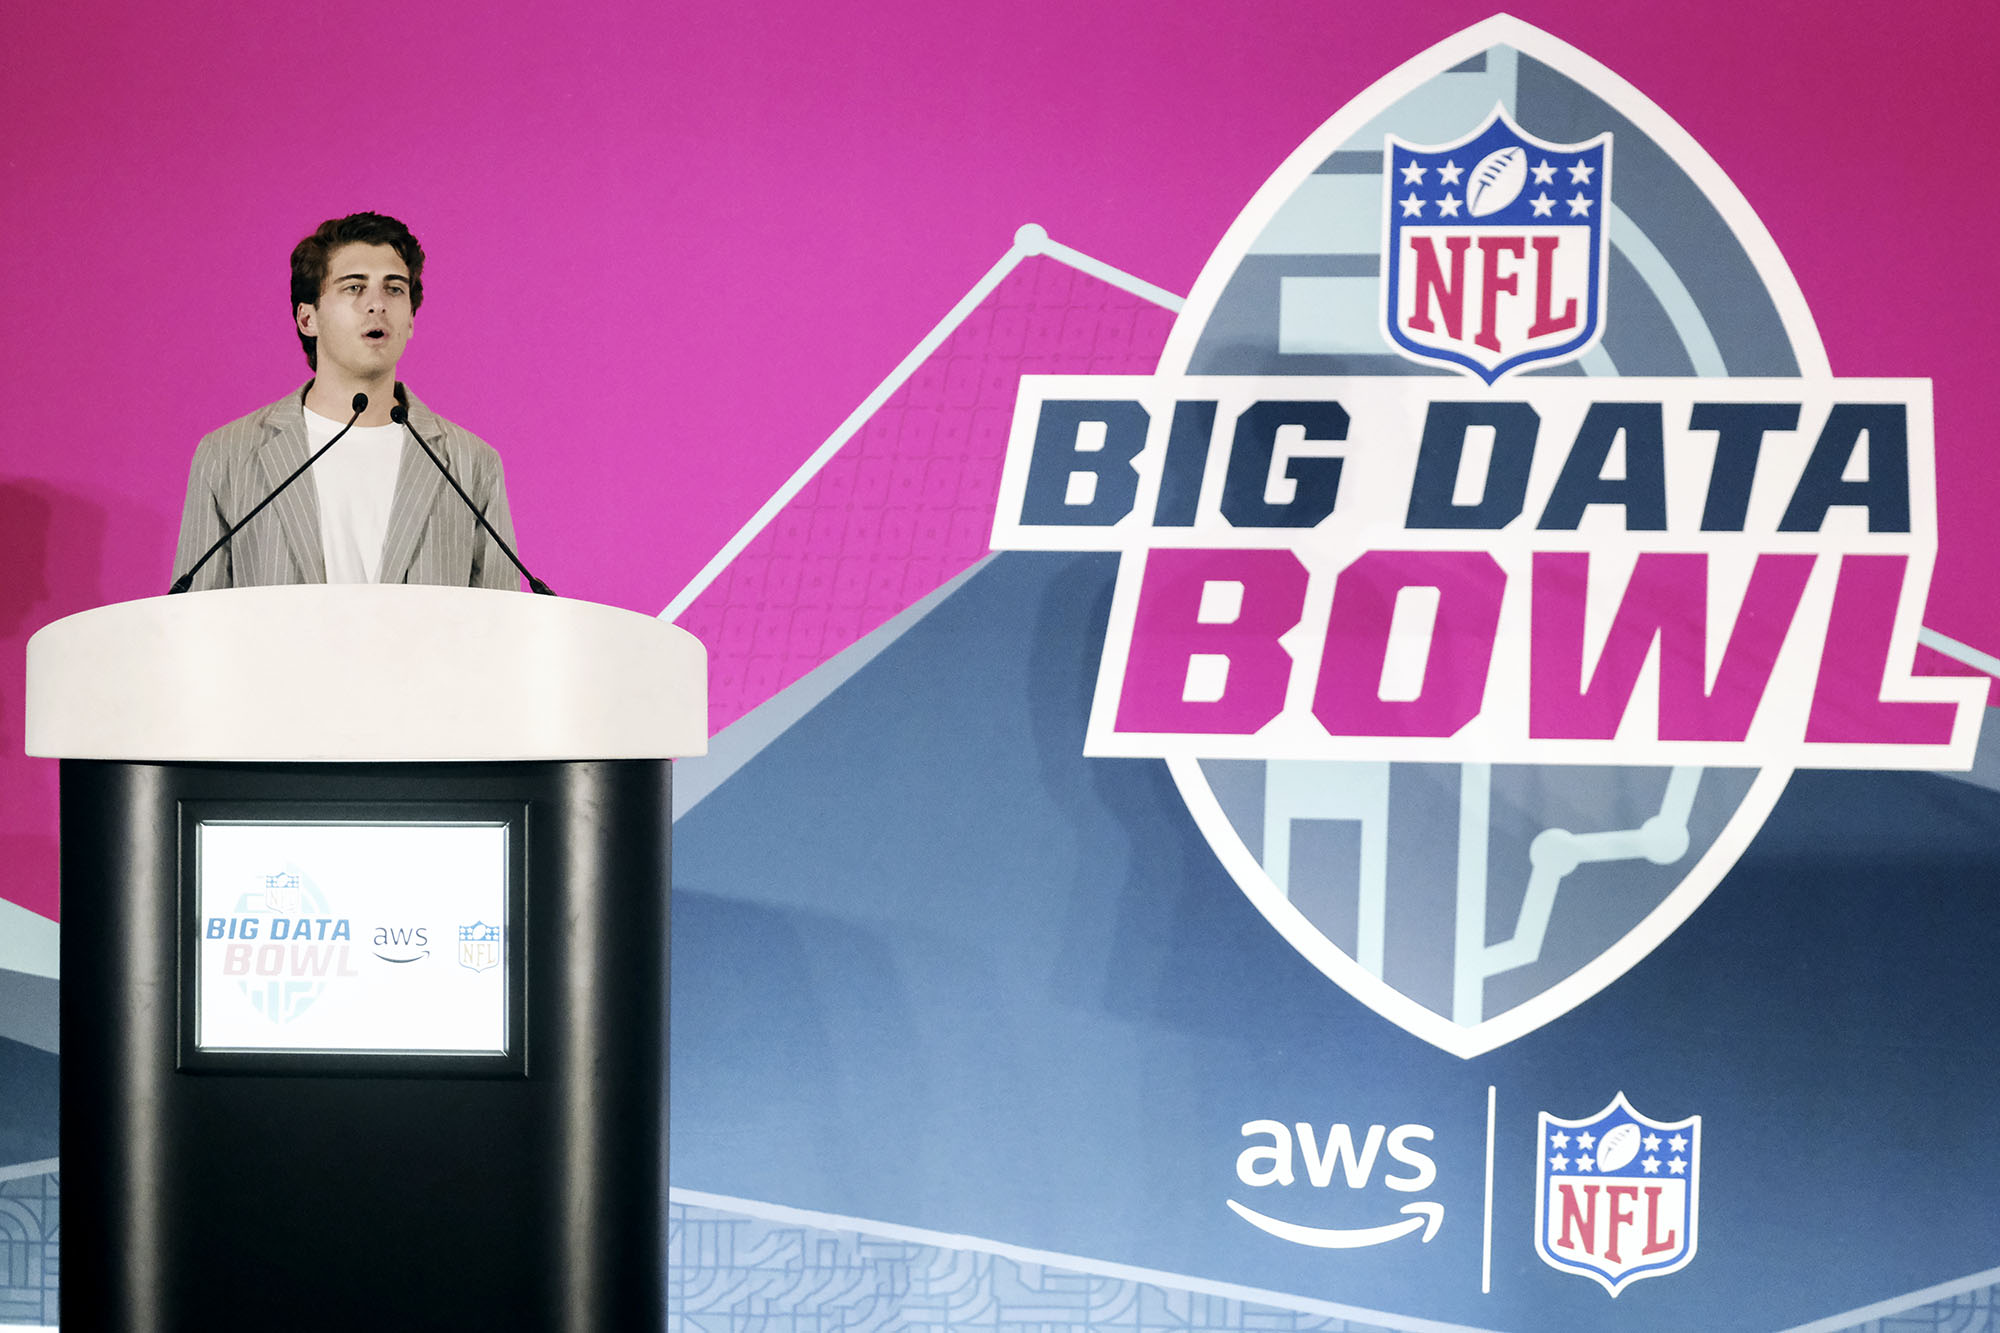 Alex Stern standing at a podium speaking at the Big Data Bowl